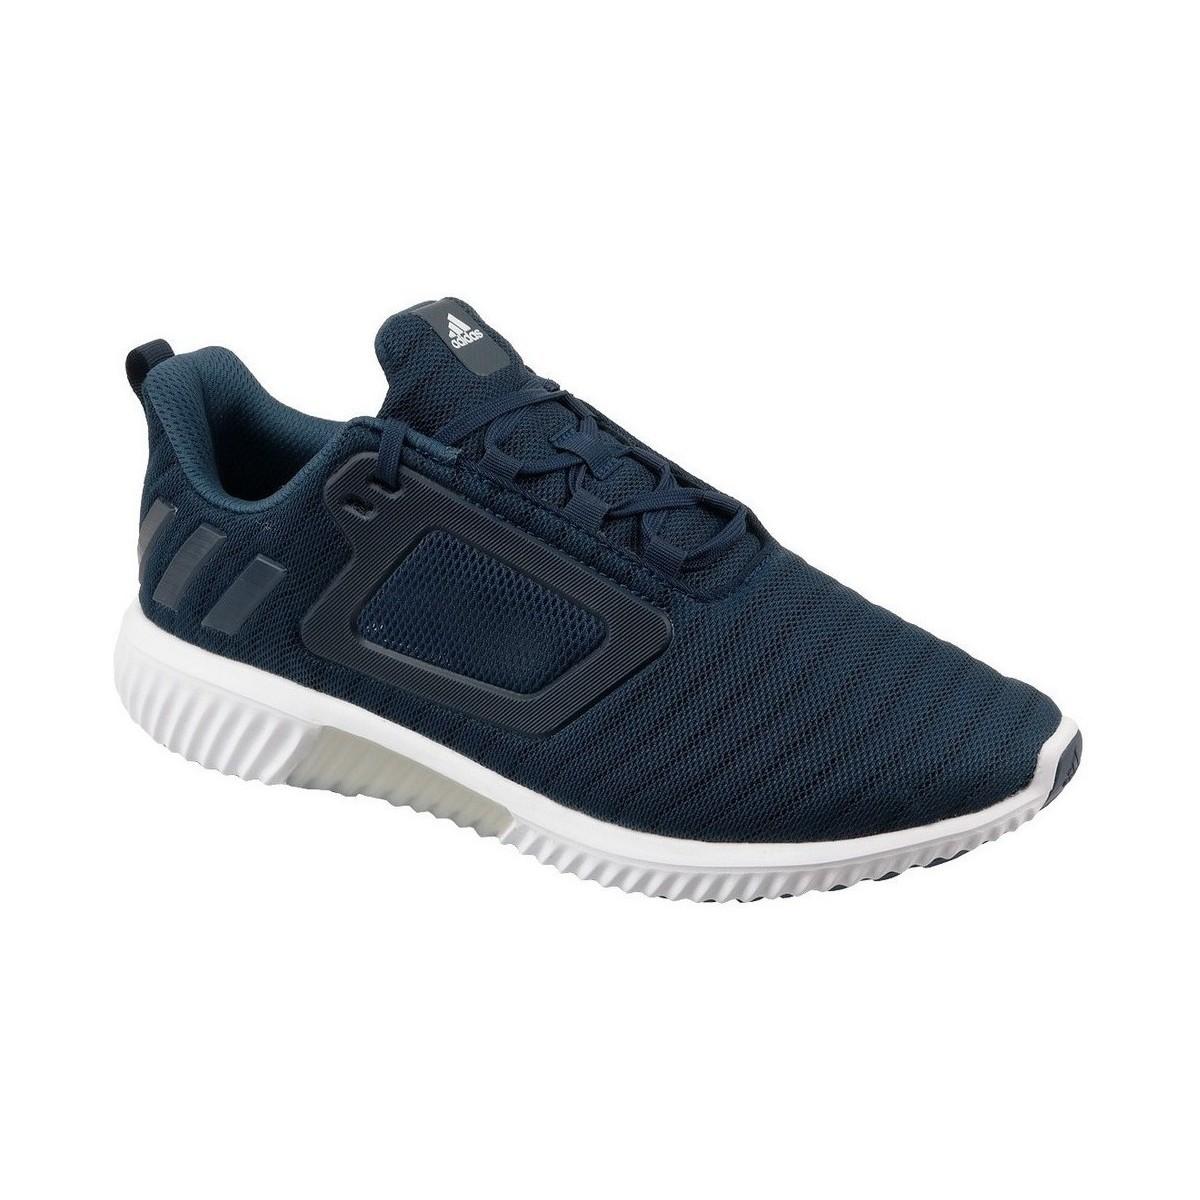 adidas Climacool Cm S Running Shoes in Blue for Men - Save 70% - Lyst